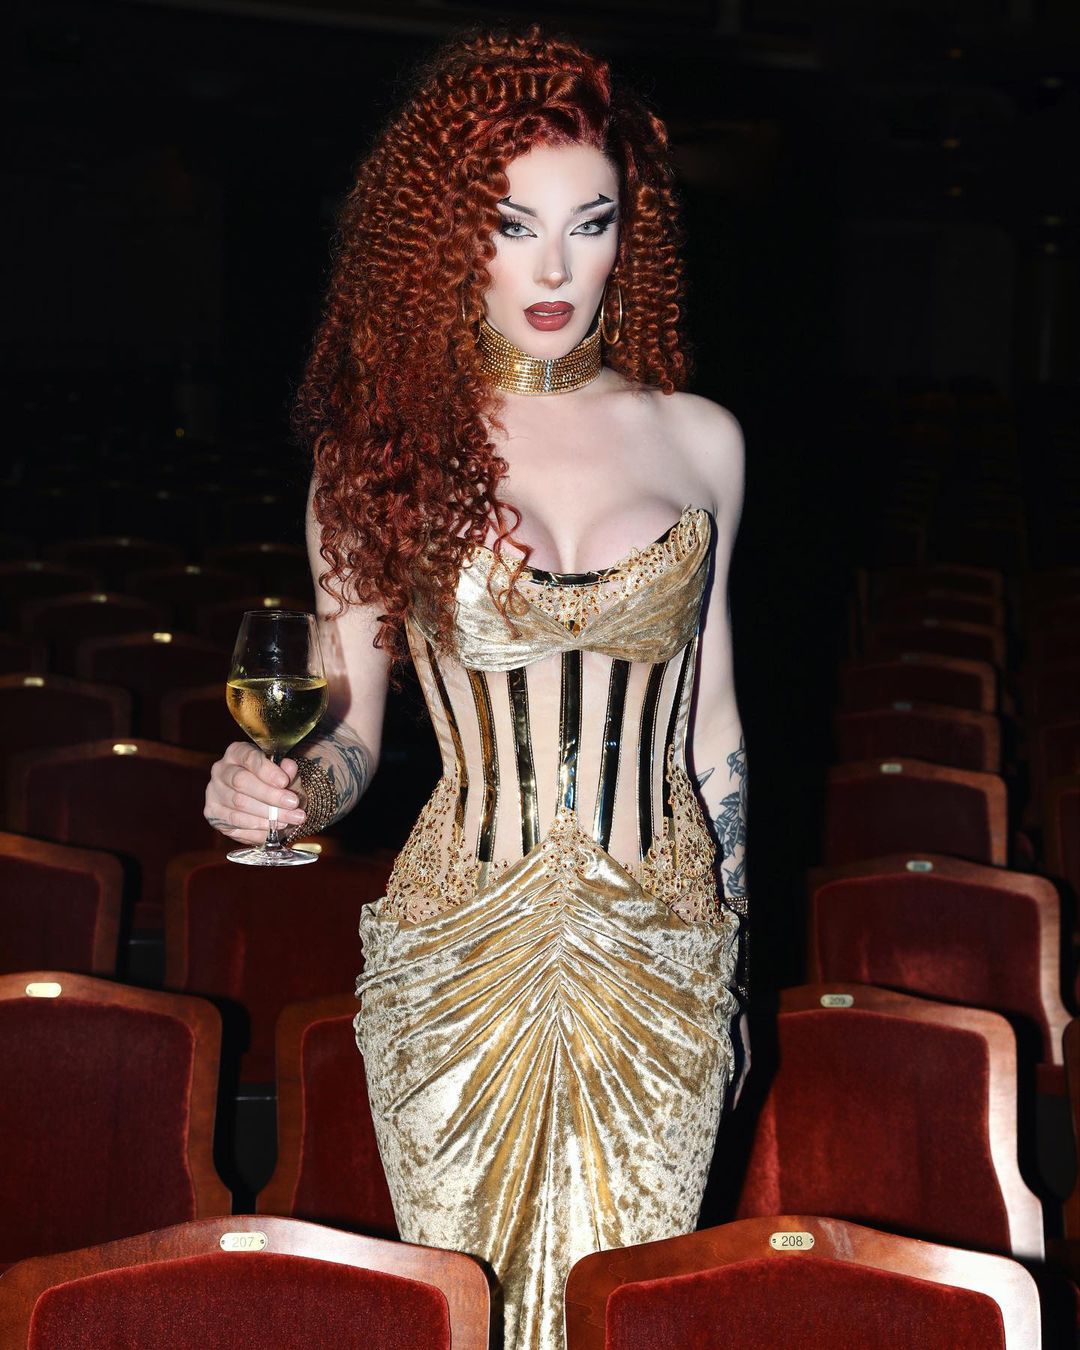 Woman with red hair and gold dress